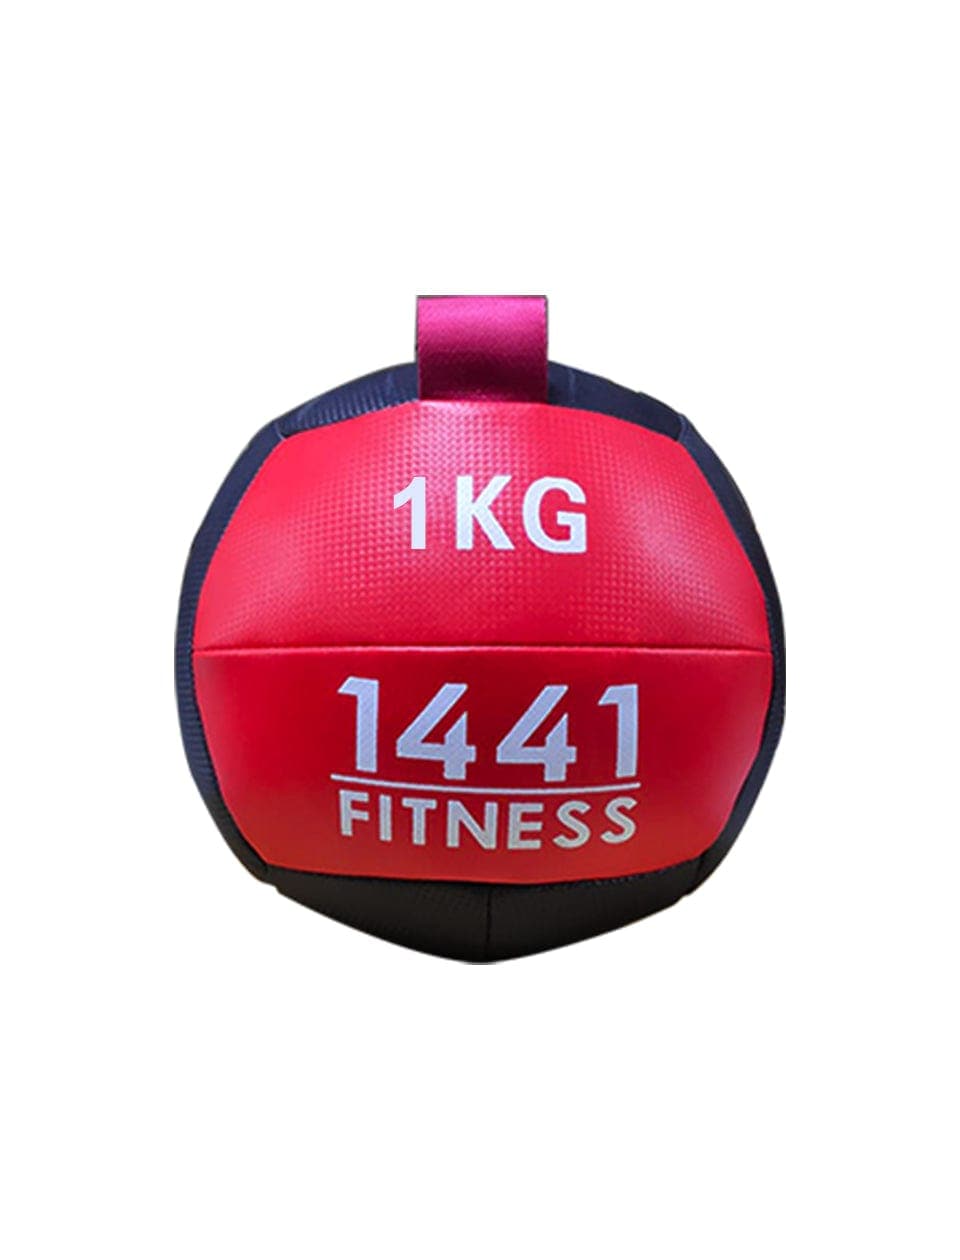 PRSAE Crossfit 1 Kg 1441 Fitness Wall Ball for Crossfit Exercises - 1 Kg to 15 Kg